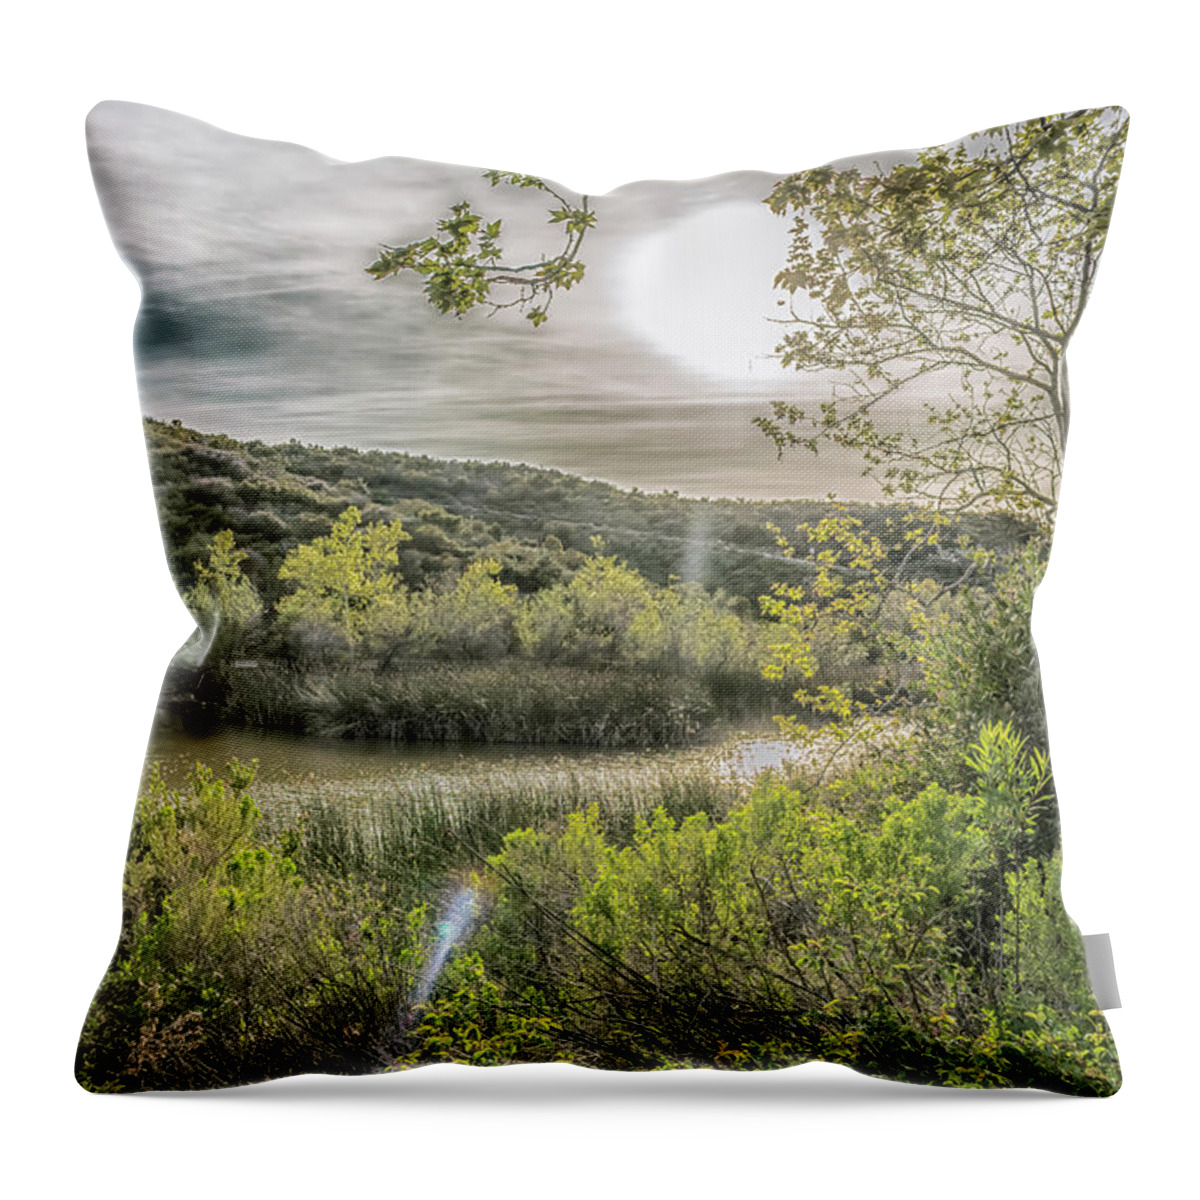 Sun Throw Pillow featuring the photograph Big Sun by Alison Frank